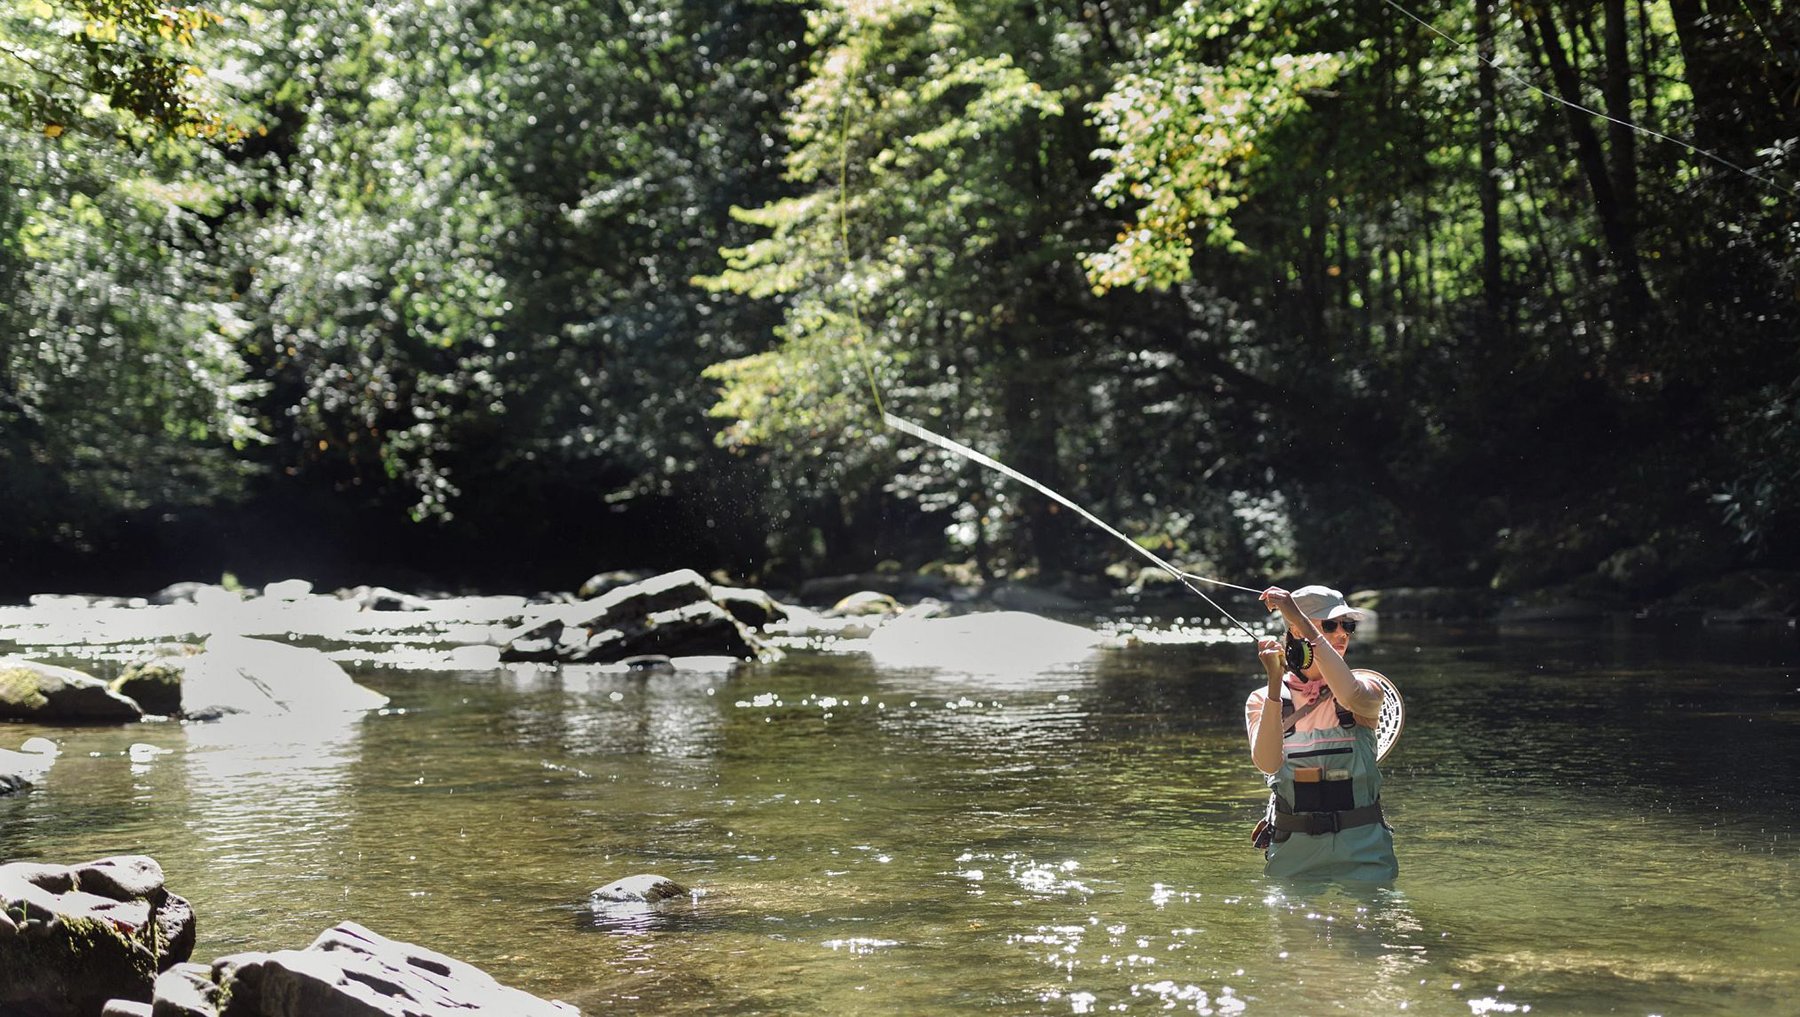 Action shot of woman casting a line out on her fly rod in a river in Bryson City.